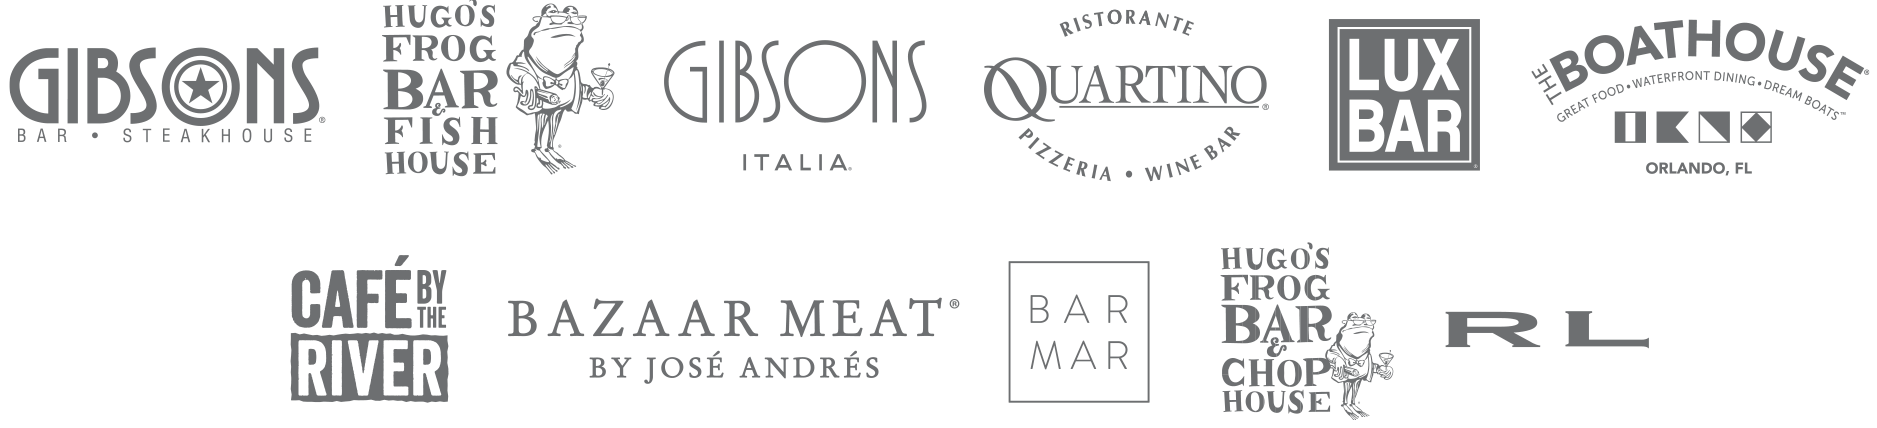 Trust Bar with Gibsons Restaurant Group Logos